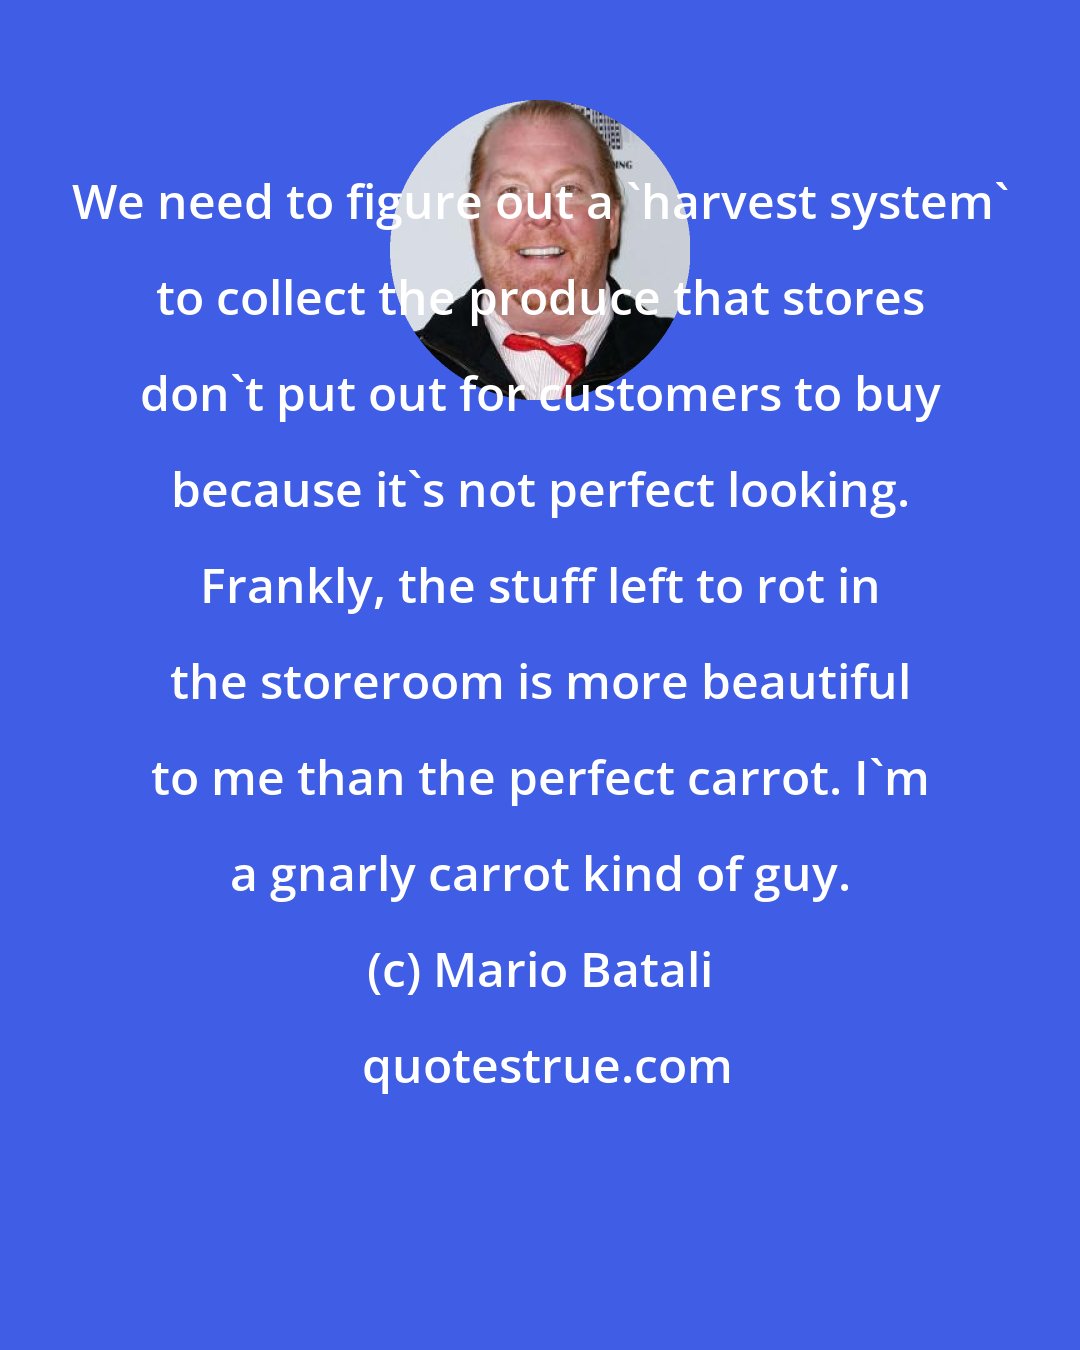 Mario Batali: We need to figure out a 'harvest system' to collect the produce that stores don't put out for customers to buy because it's not perfect looking. Frankly, the stuff left to rot in the storeroom is more beautiful to me than the perfect carrot. I'm a gnarly carrot kind of guy.